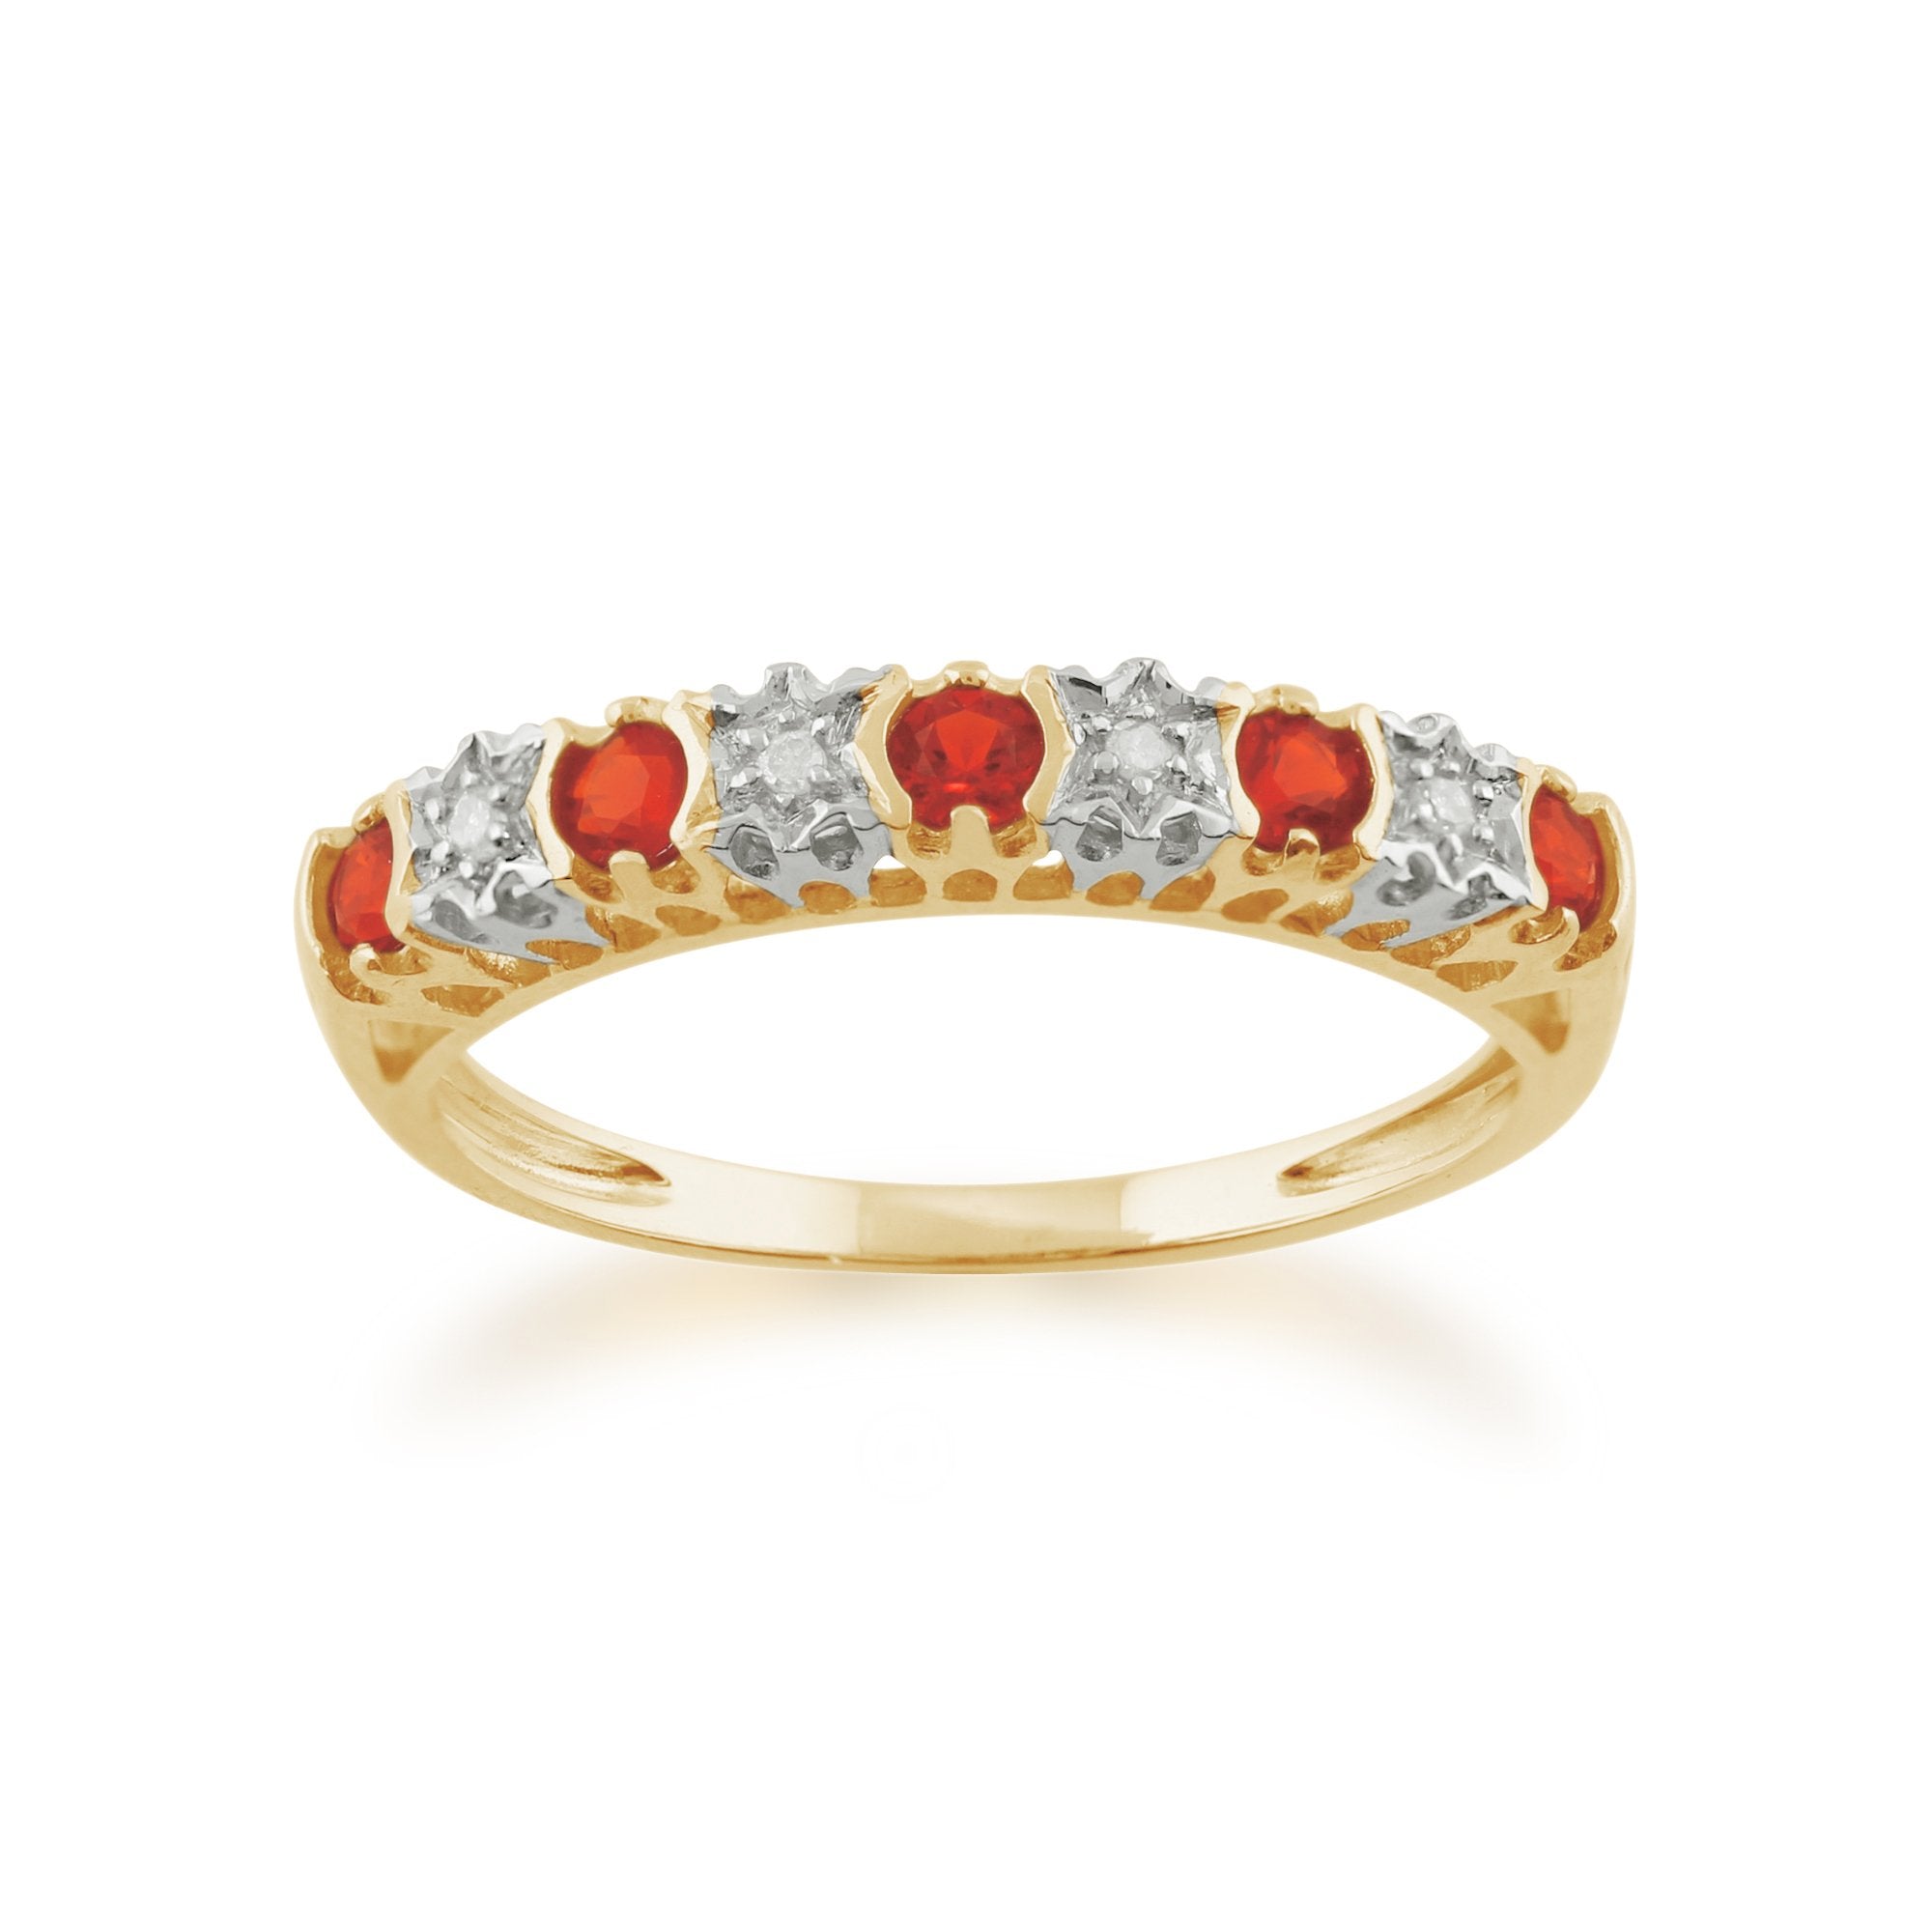 Round Fire Opal & Diamond Eternity Ring in 9ct Gold 